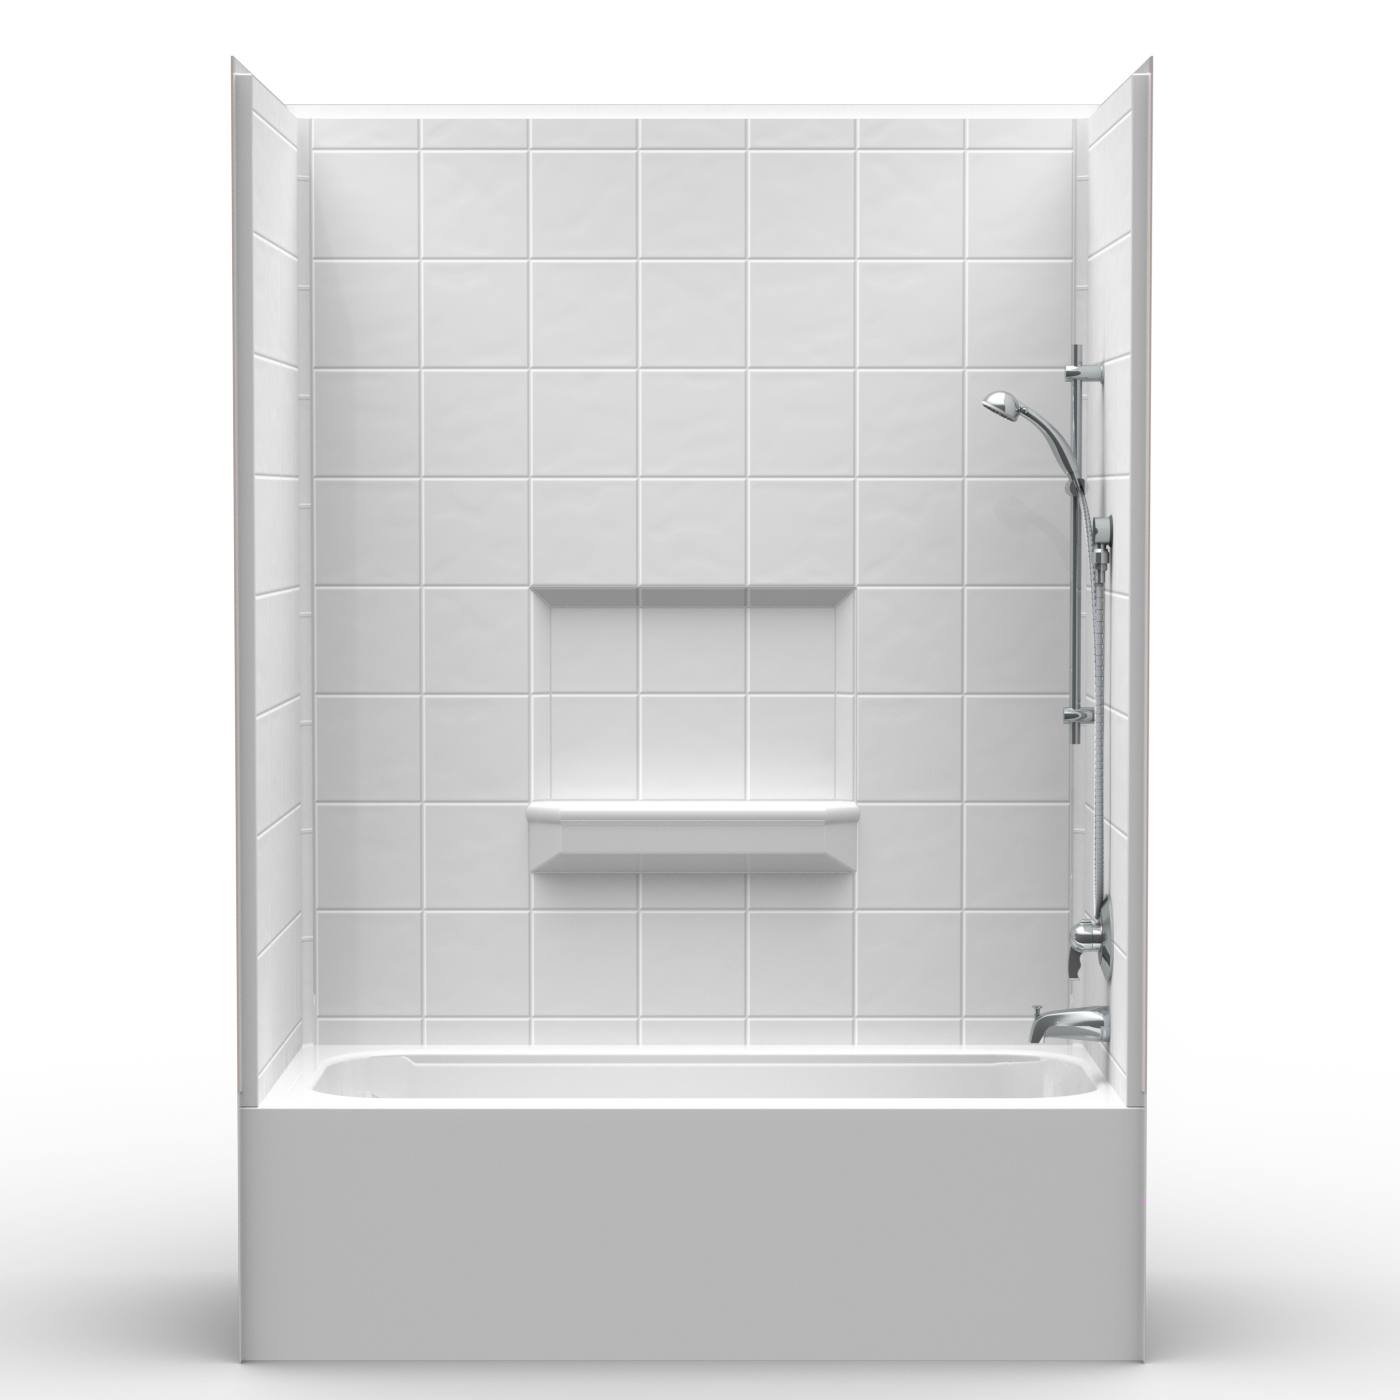 60 X 30 85 Tub Shower Combo, One Piece Bathtub And Shower Units